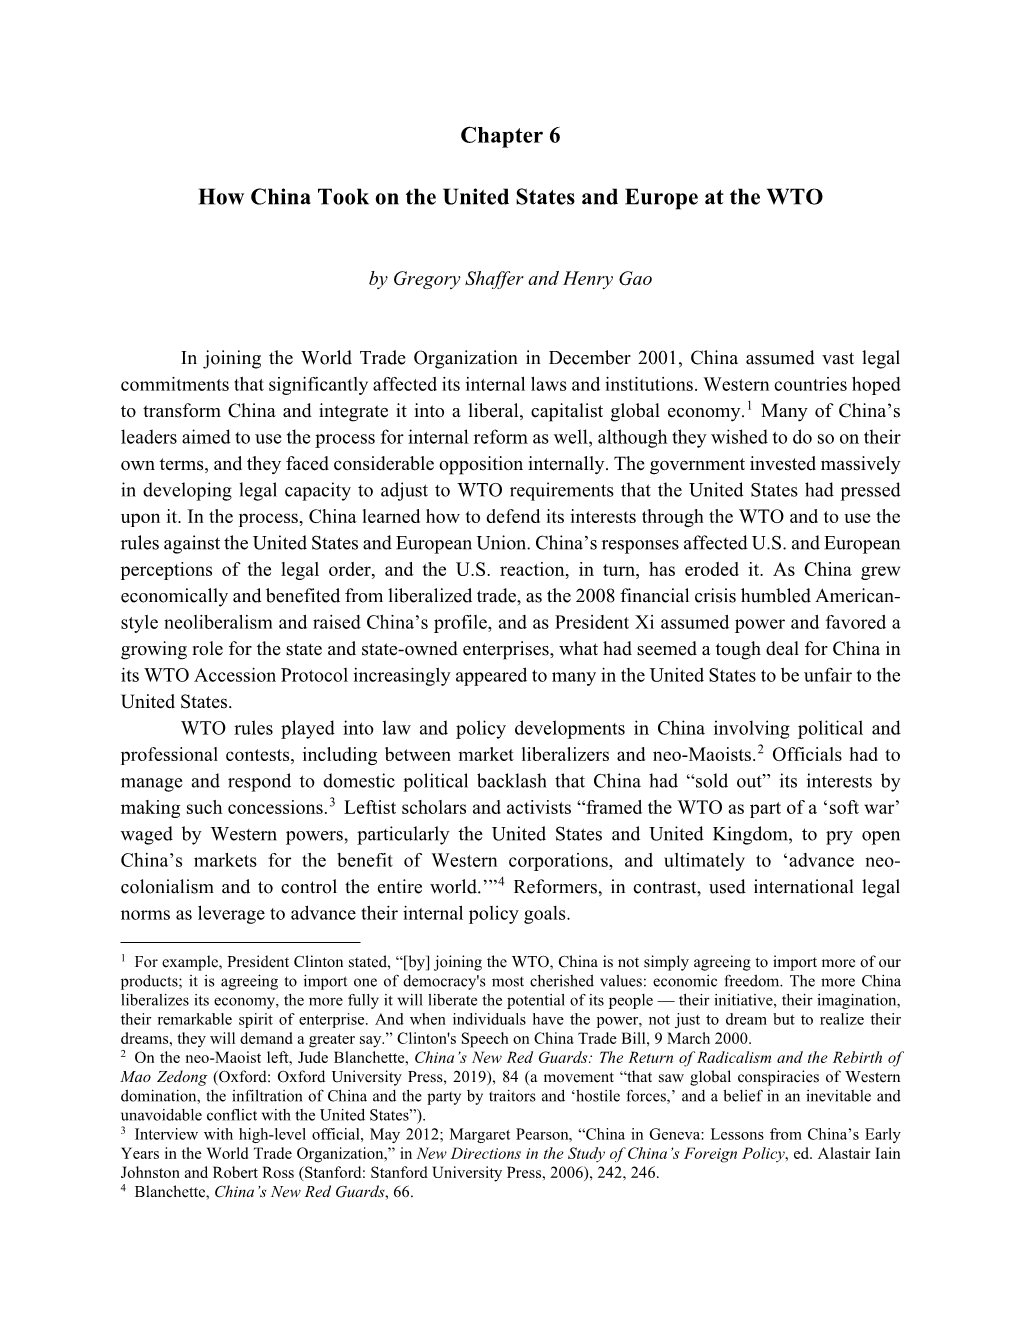 Chapter 6 How China Took on the United States and Europe at The